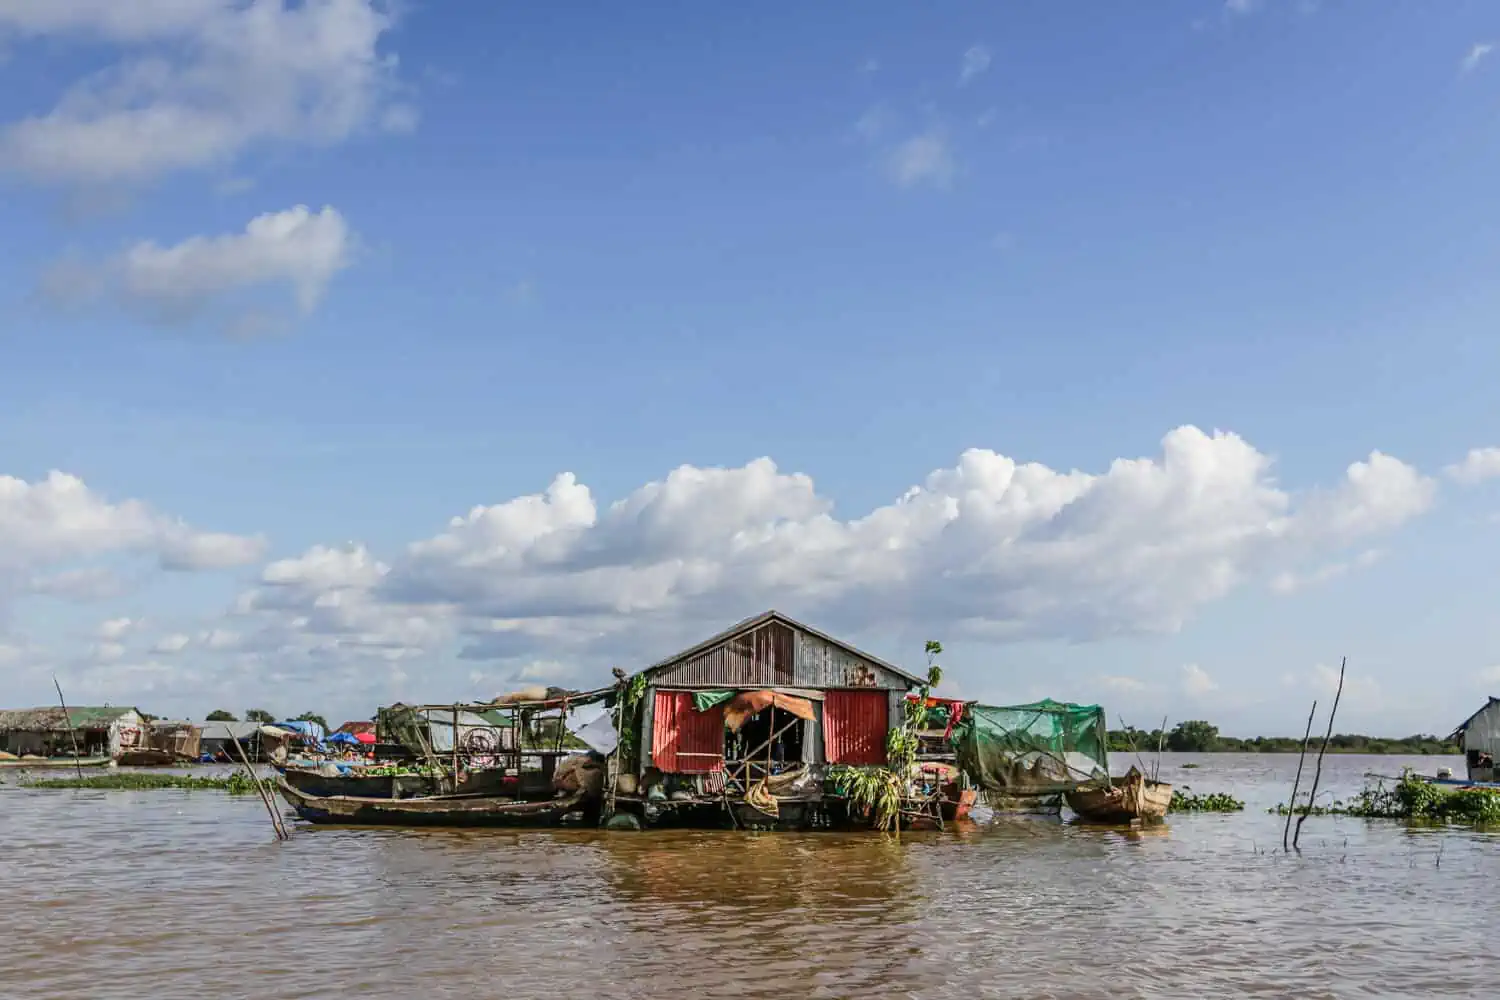 The Tonle Sap Lake is one of the most unique natural ecosystems in Cambodia